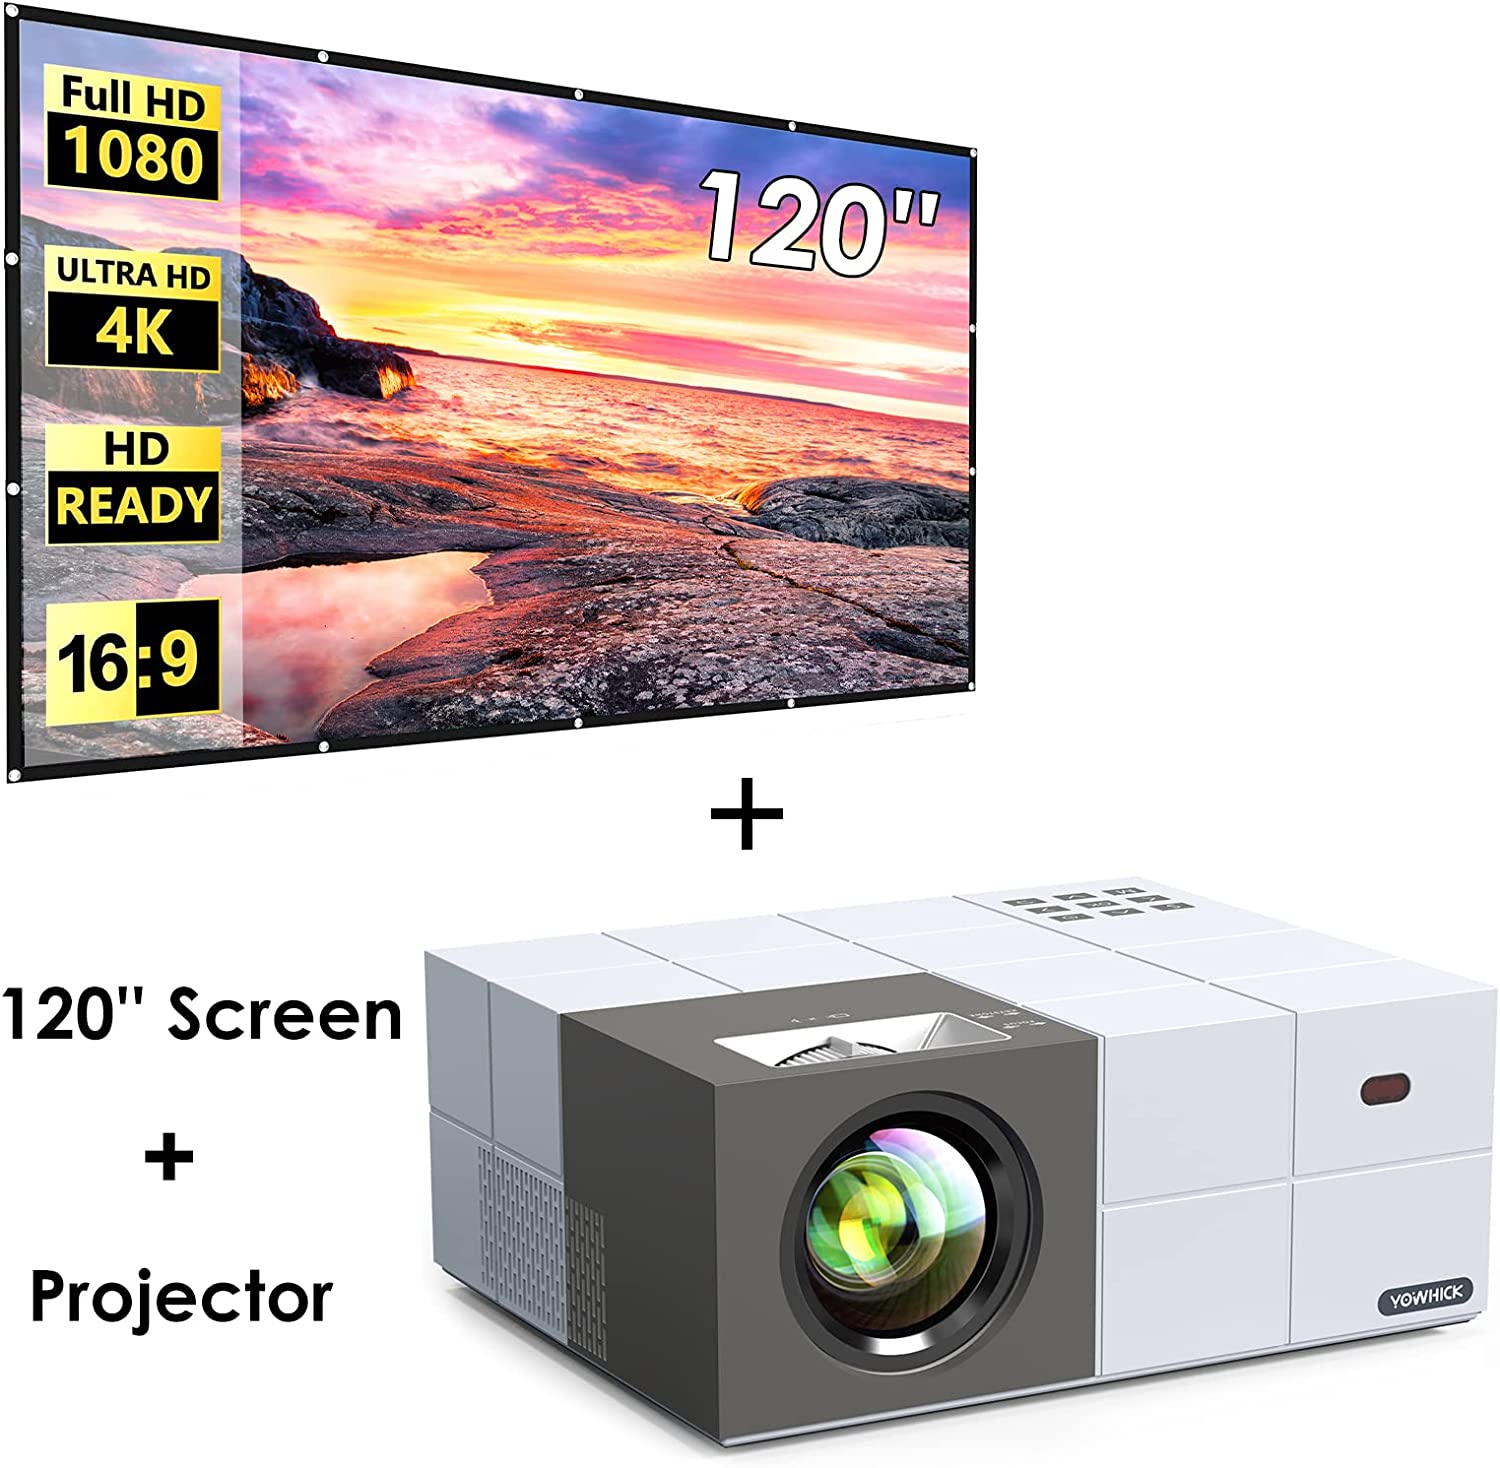  Mini Projector 4K Supported, Native 1080P Outdoor